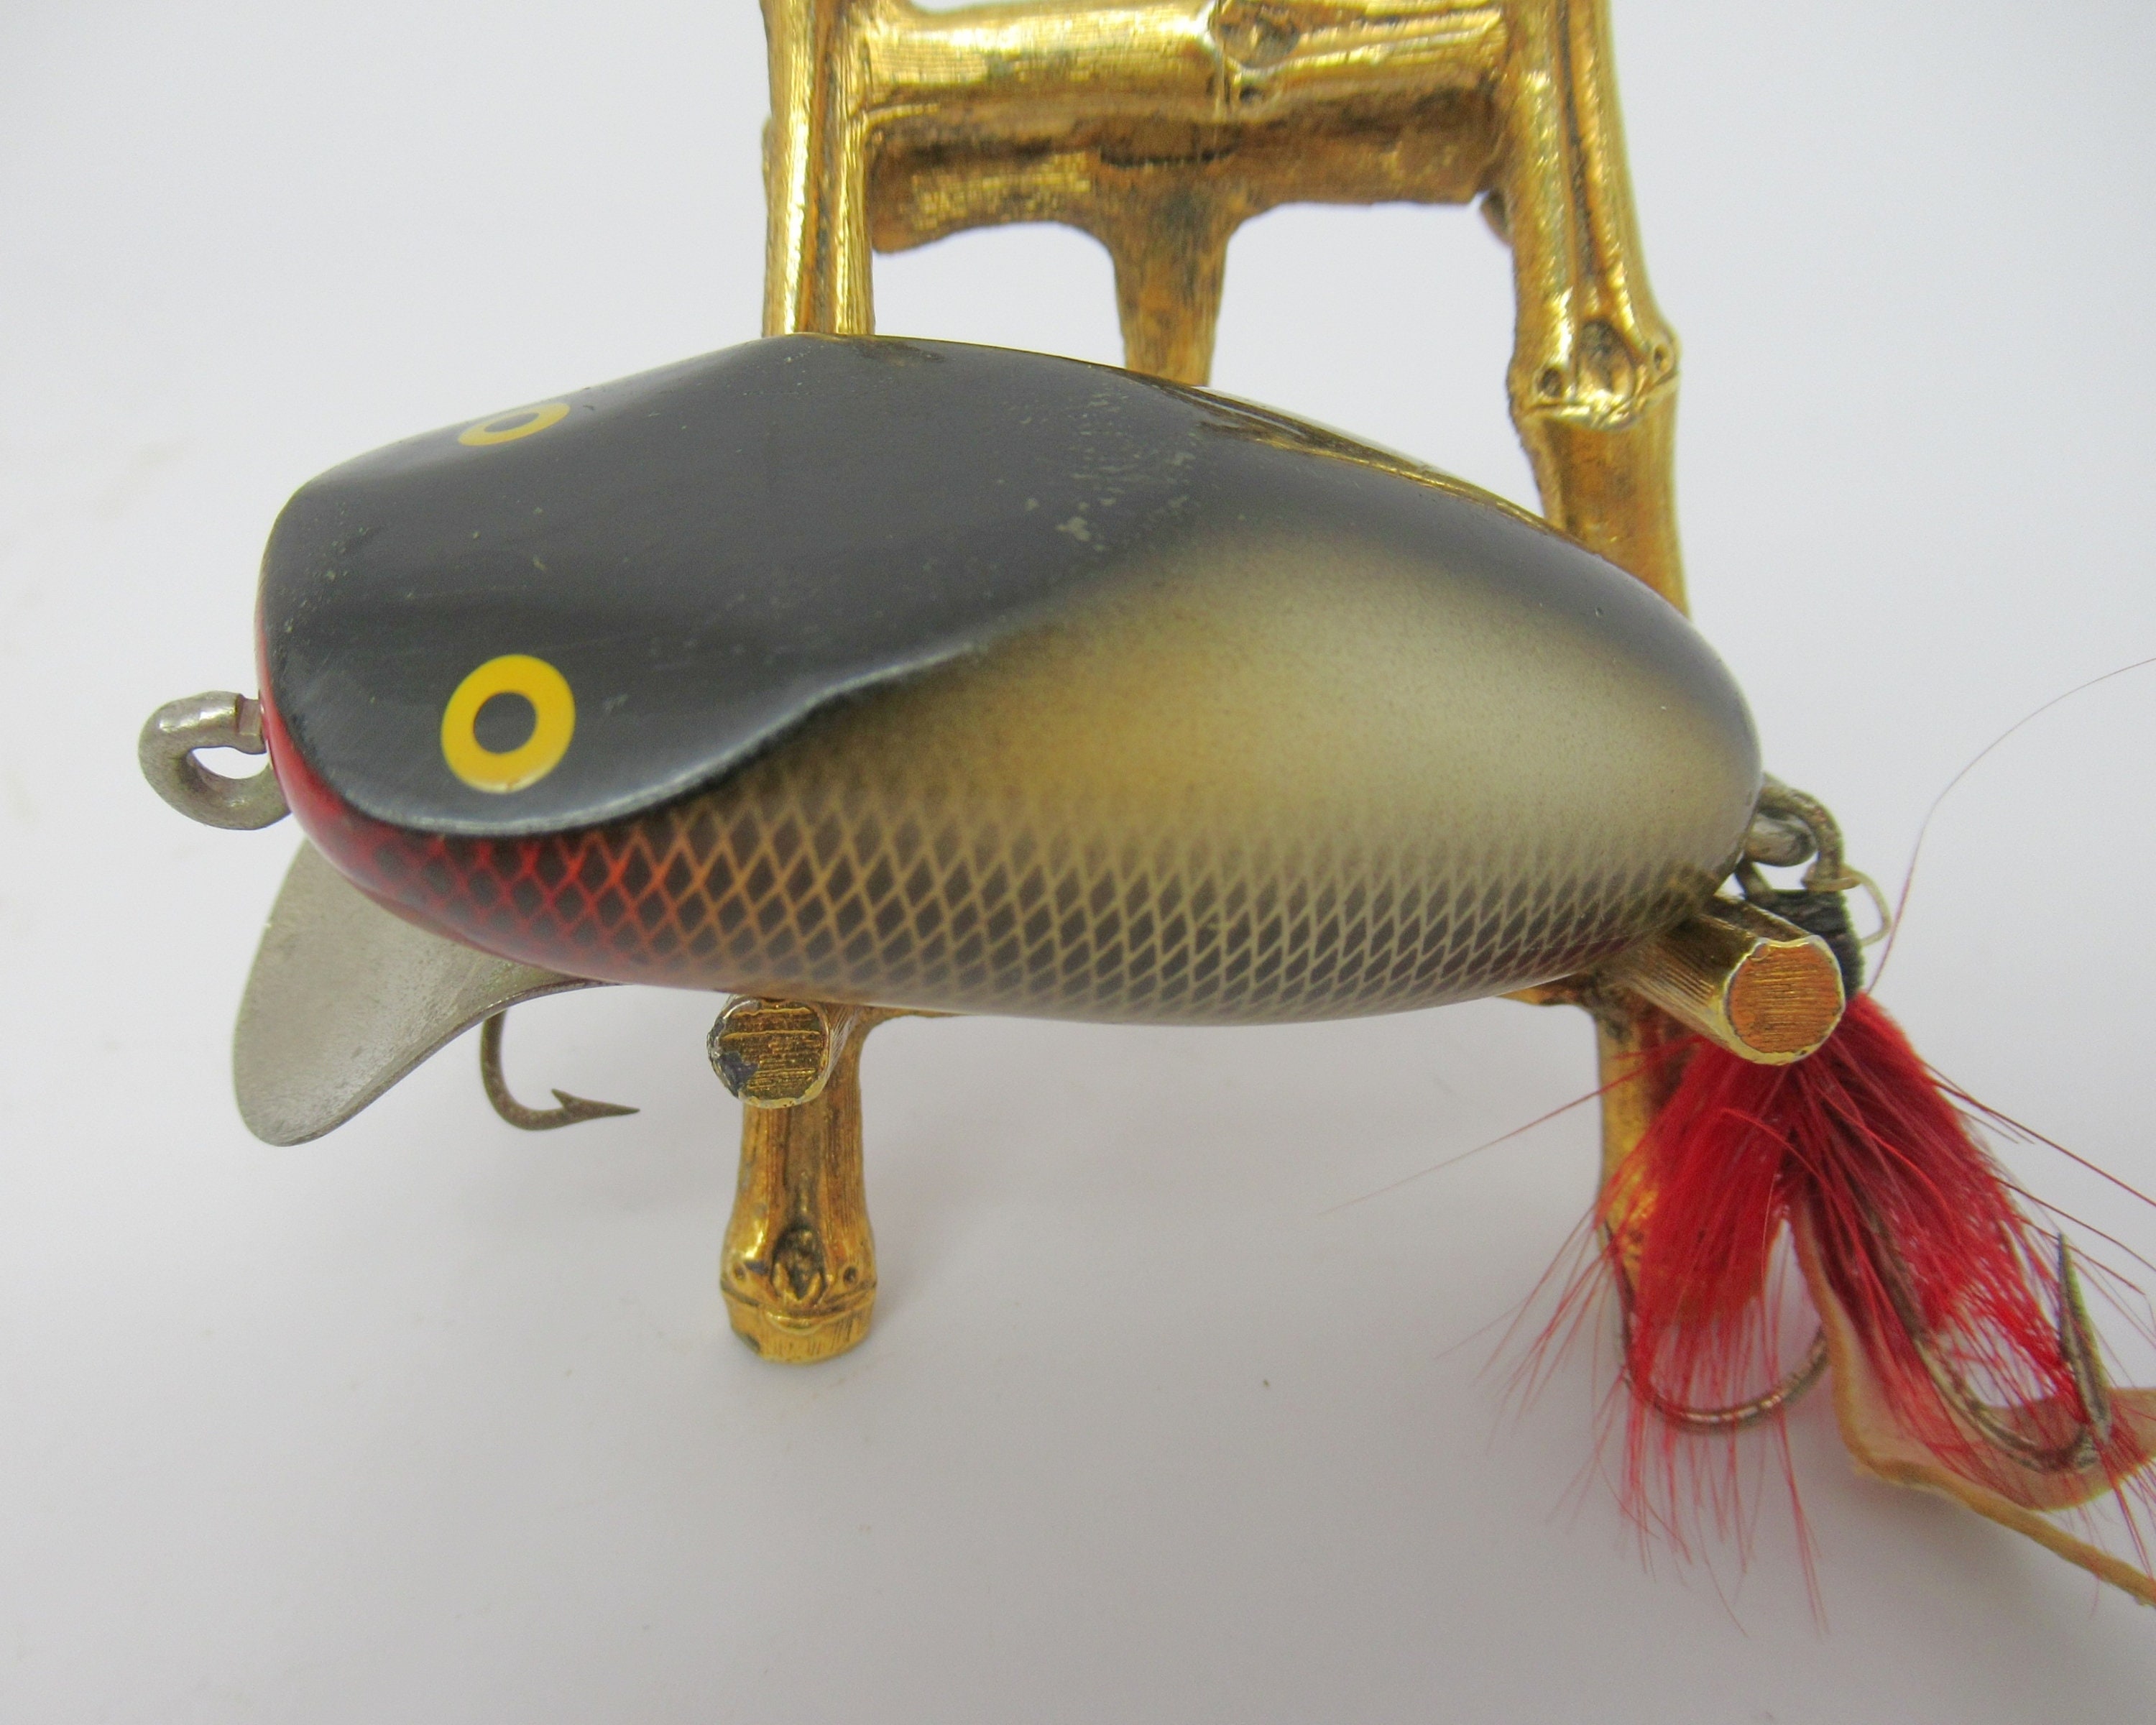 Vintage Fishing Lure Ol Skipper Lucky Tail Wobbler Fishing Gift for Dad  Fishing Decor Antique Fishing Tackle 